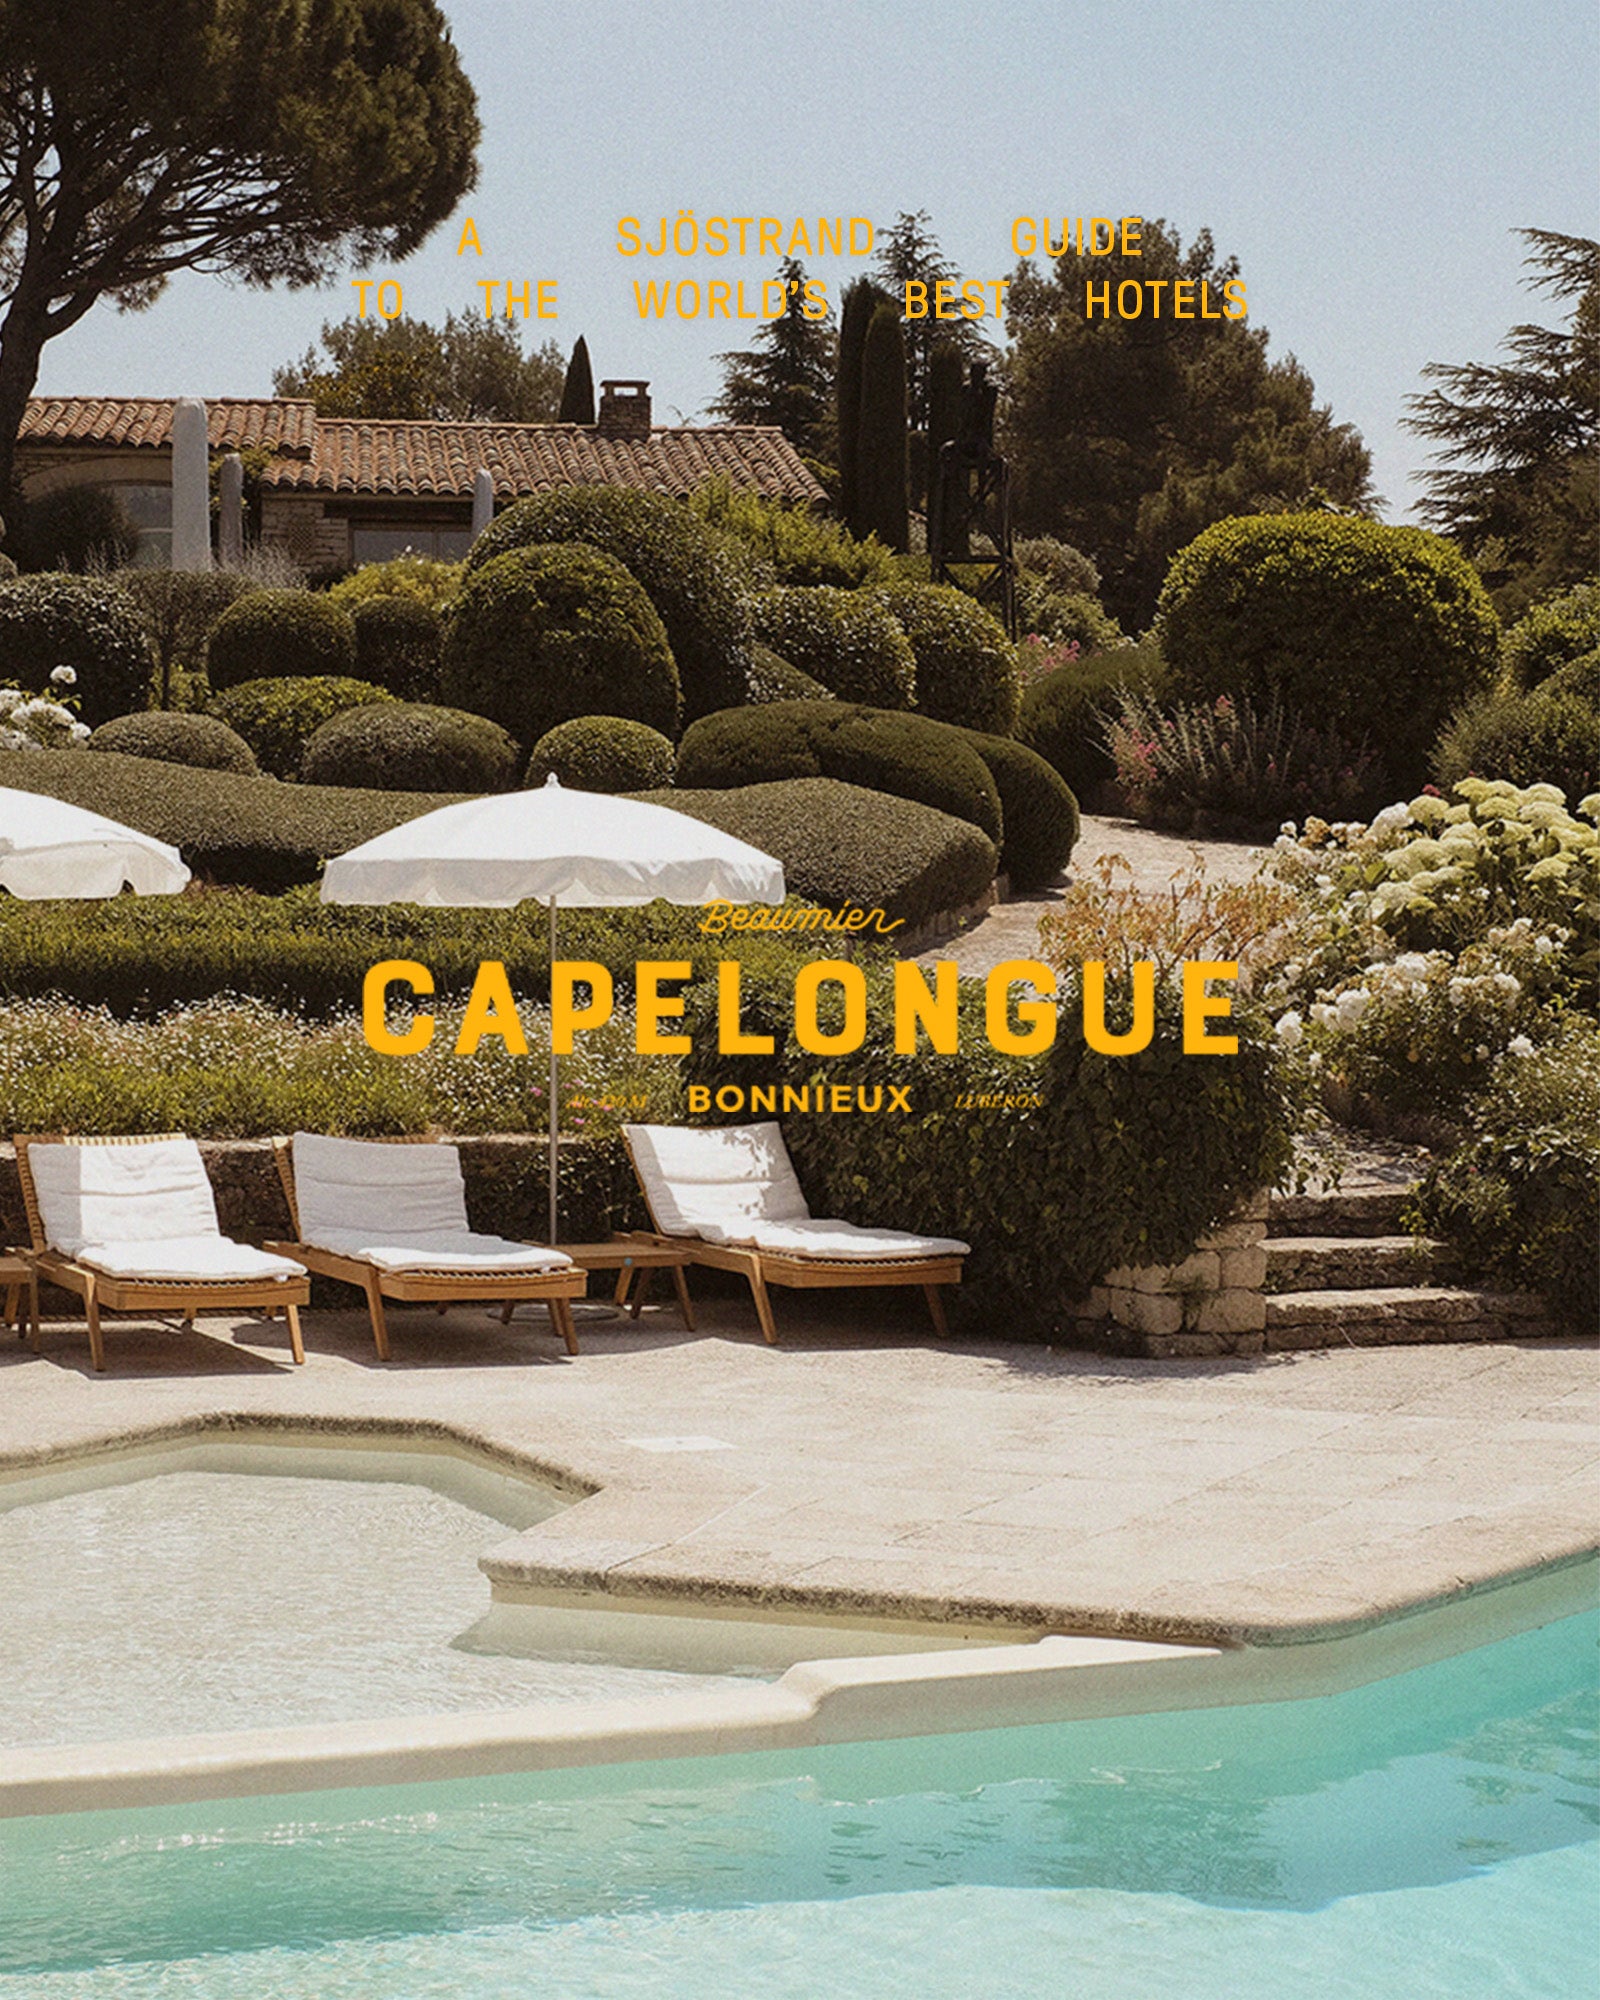 A Sjöstrand guide to the world's best hotels - Capelongue in Provencesplit-banner image